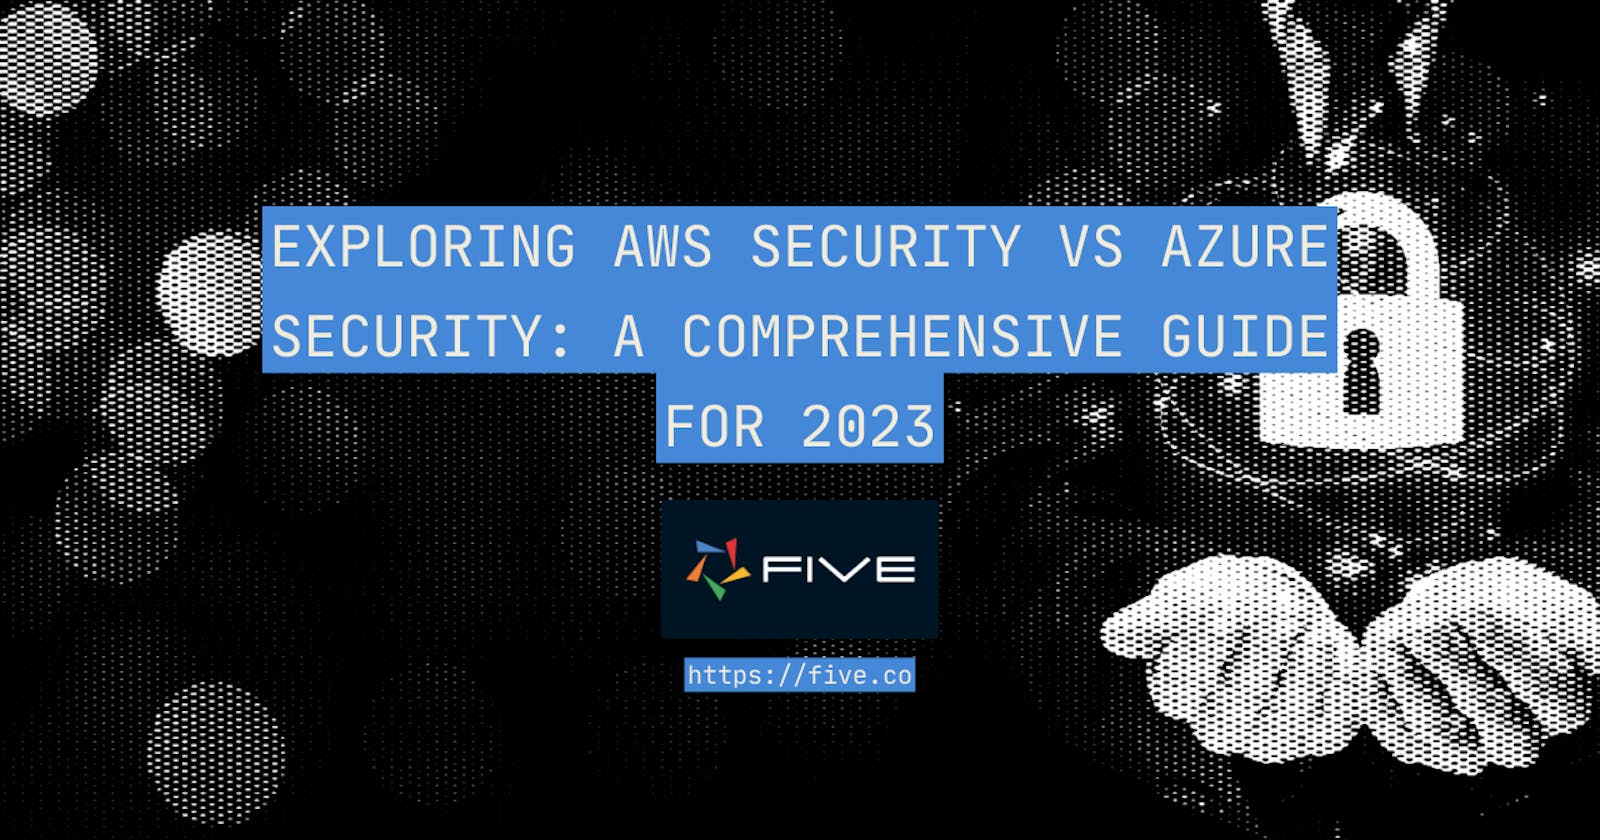 Exploring AWS Security vs Azure Security: A Comprehensive Guide for 2023